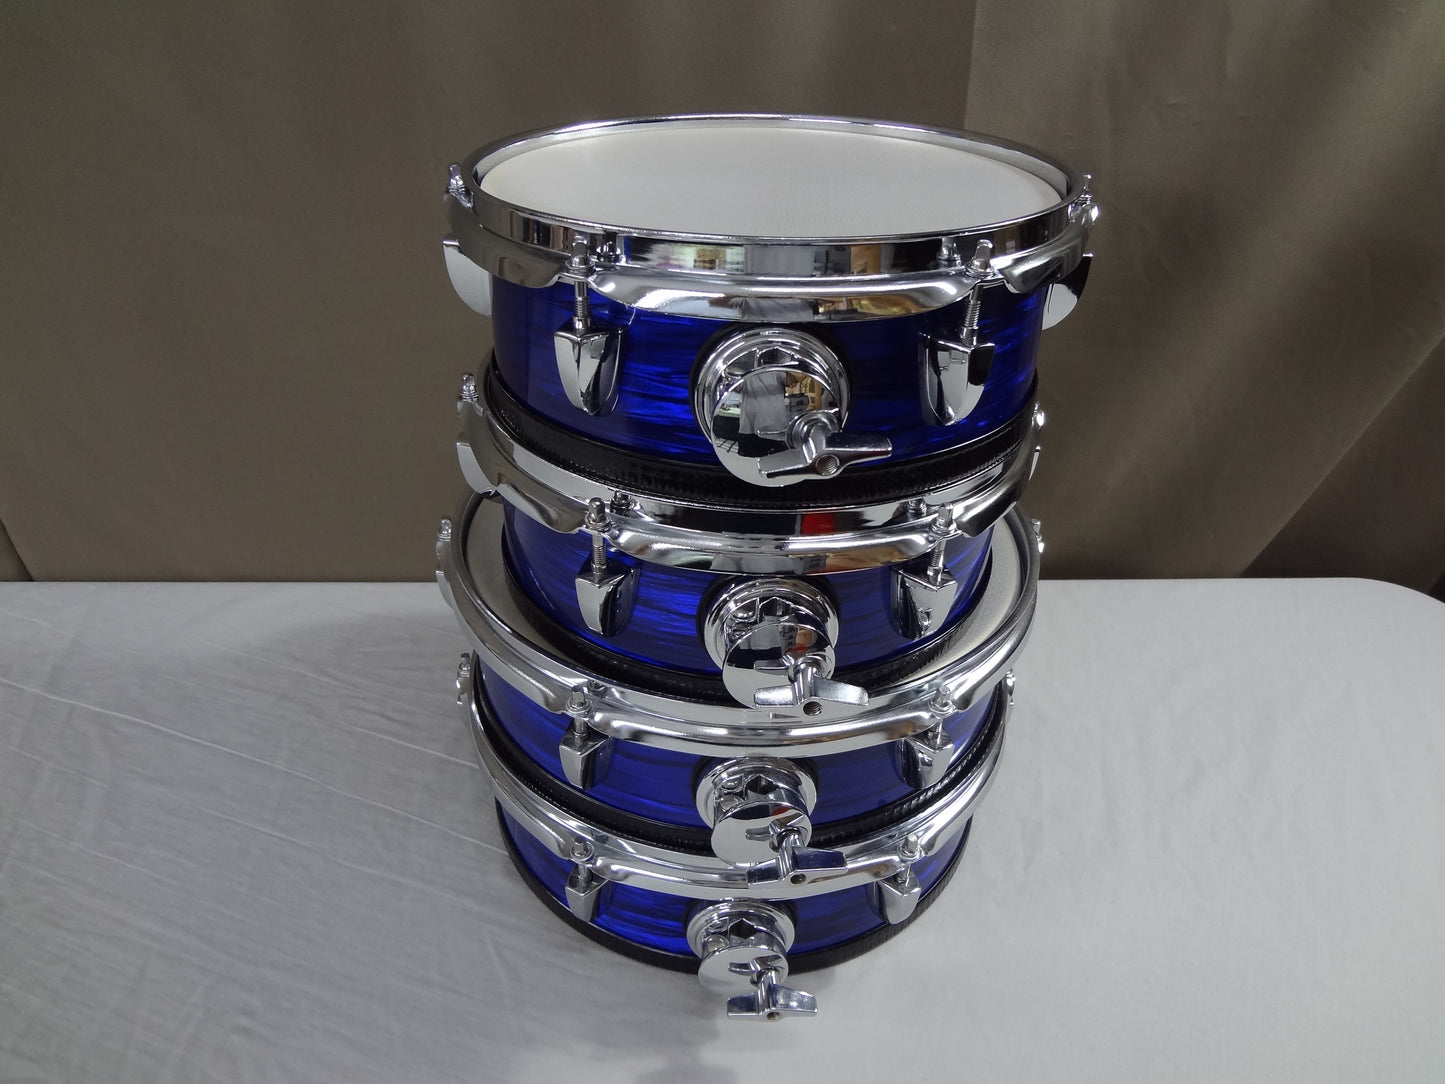 NEW 4 PIECE CUSTOM ELECTRONIC DRUM SHELL PACK - BLUE OYSTER